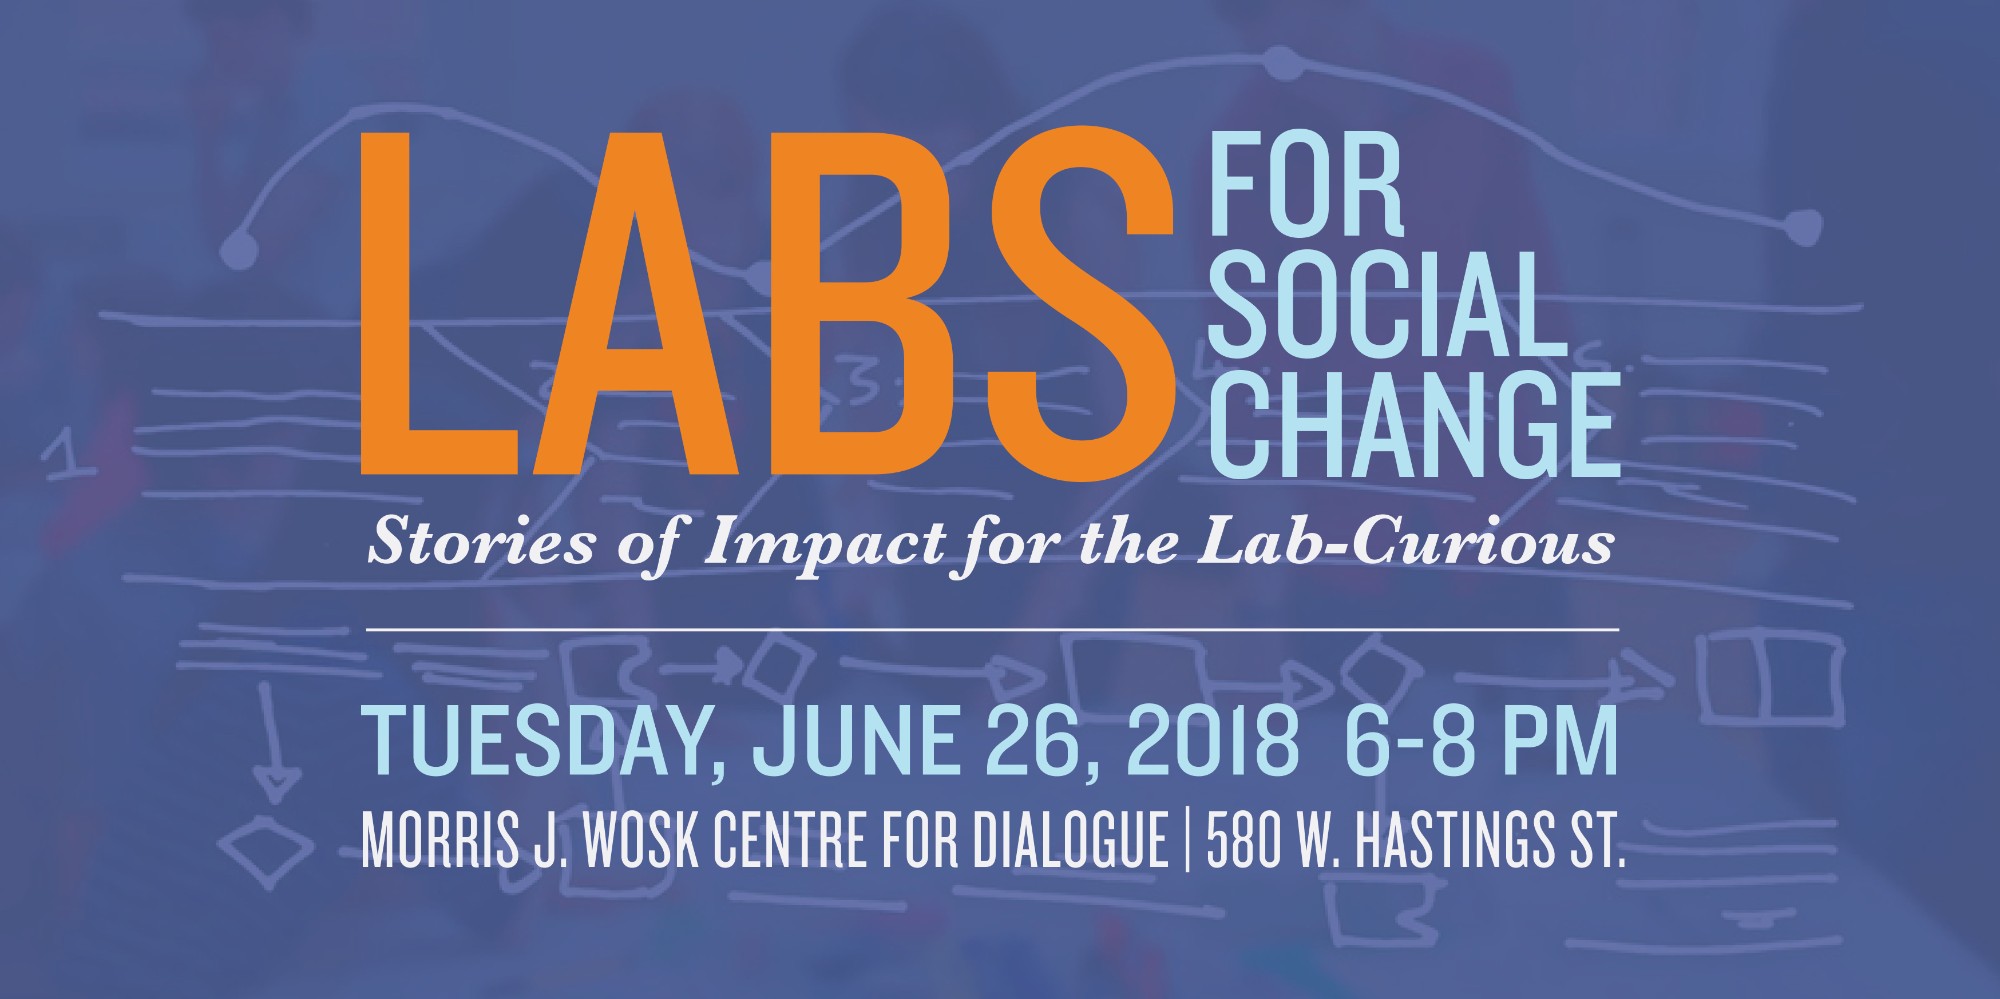 Labs for Social Change event banner